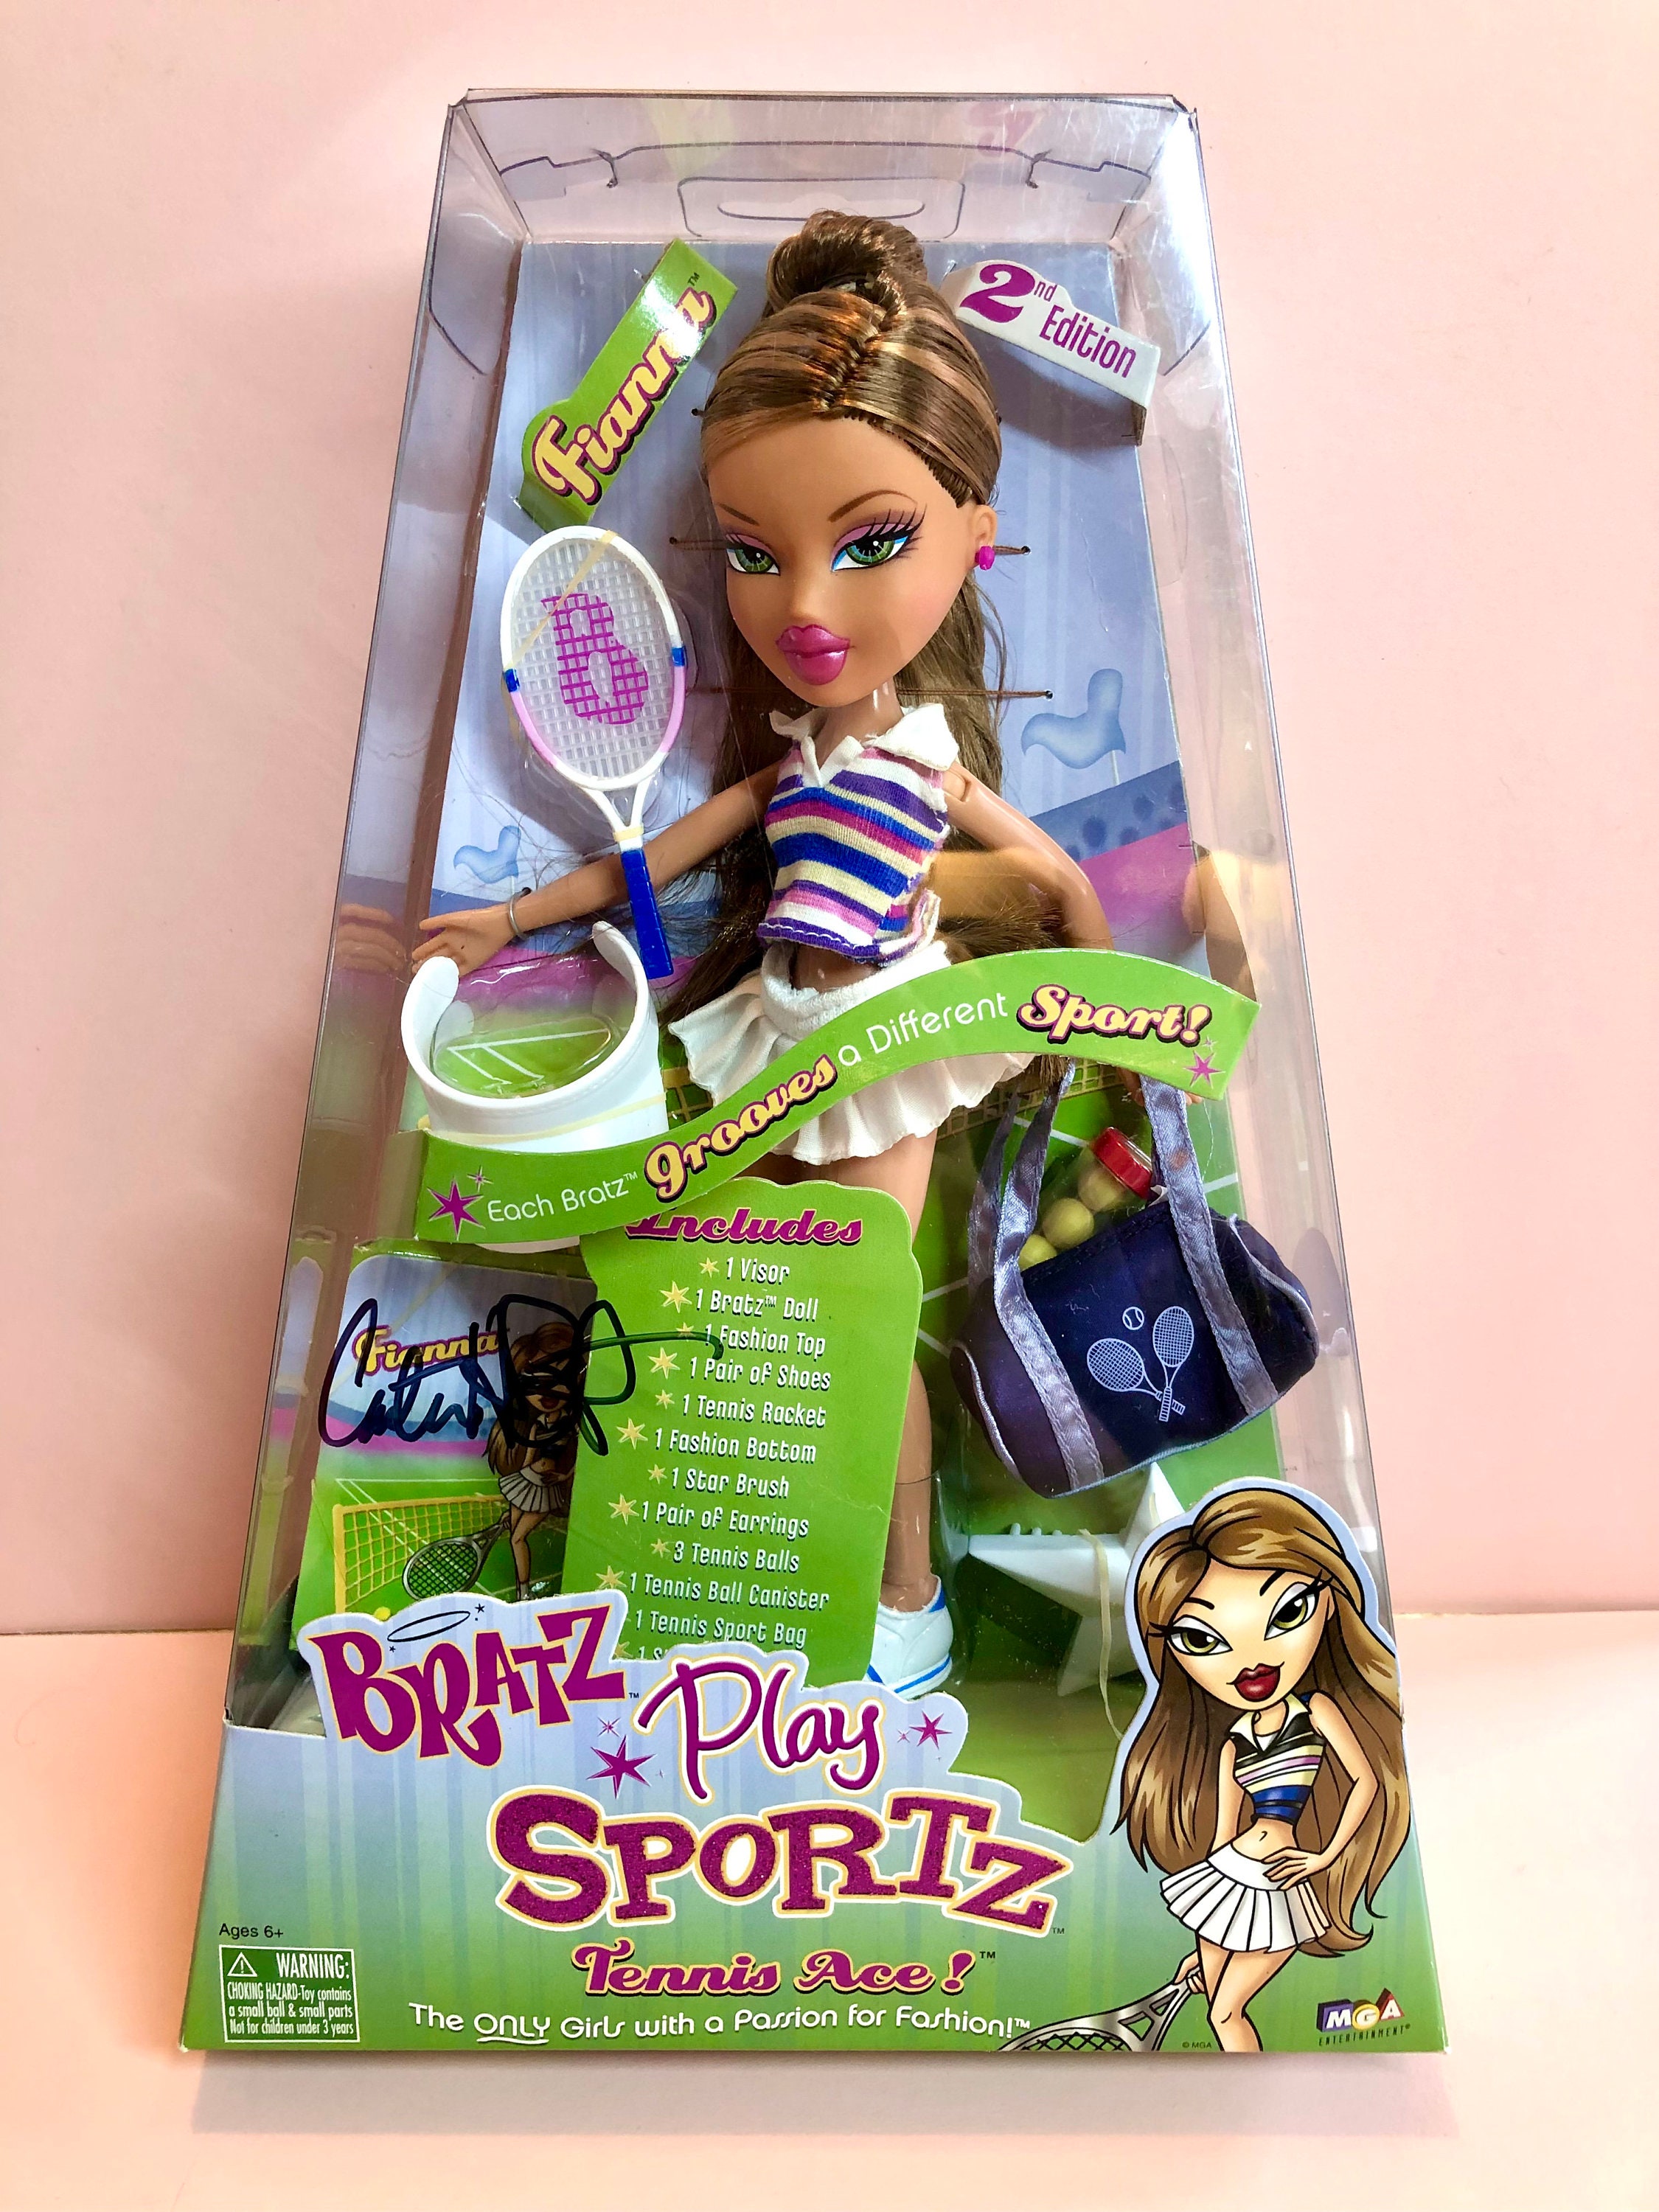 Bratz Wild Wild West Fianna! Original edition. Designed and autographed by  Bratz creator Carter Bryant, from his personal collection.